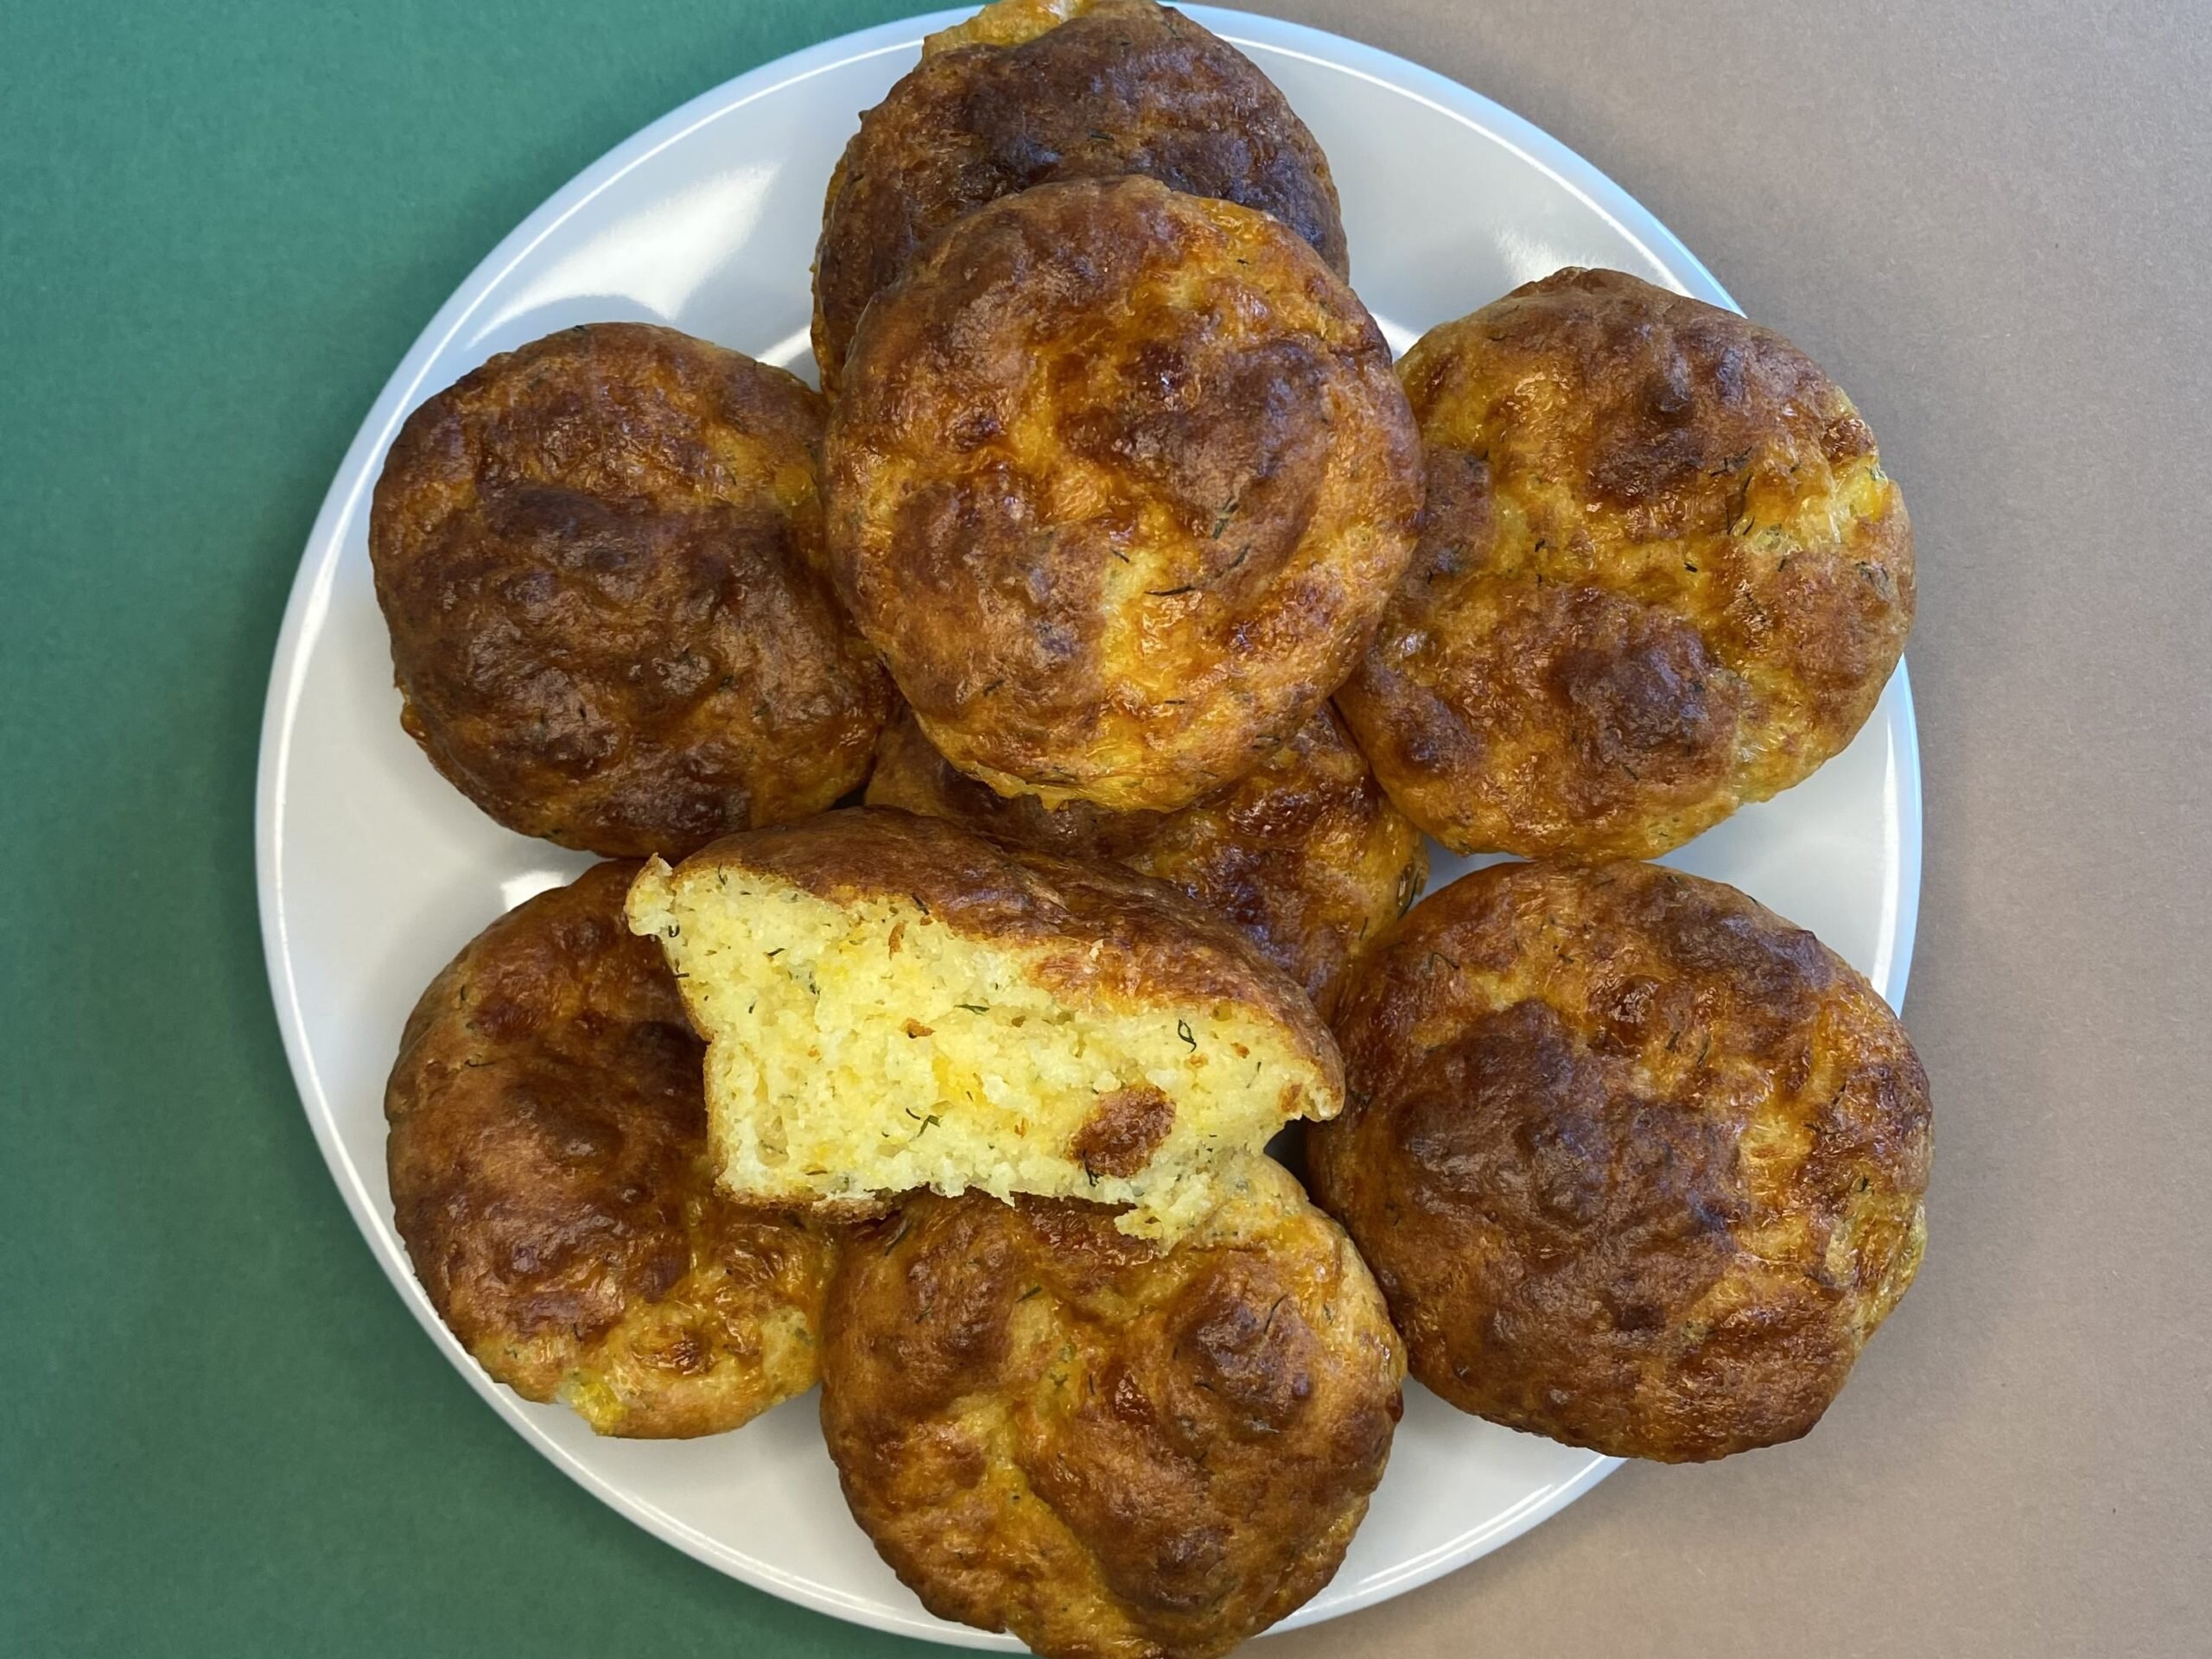 Egg and cheese muffins